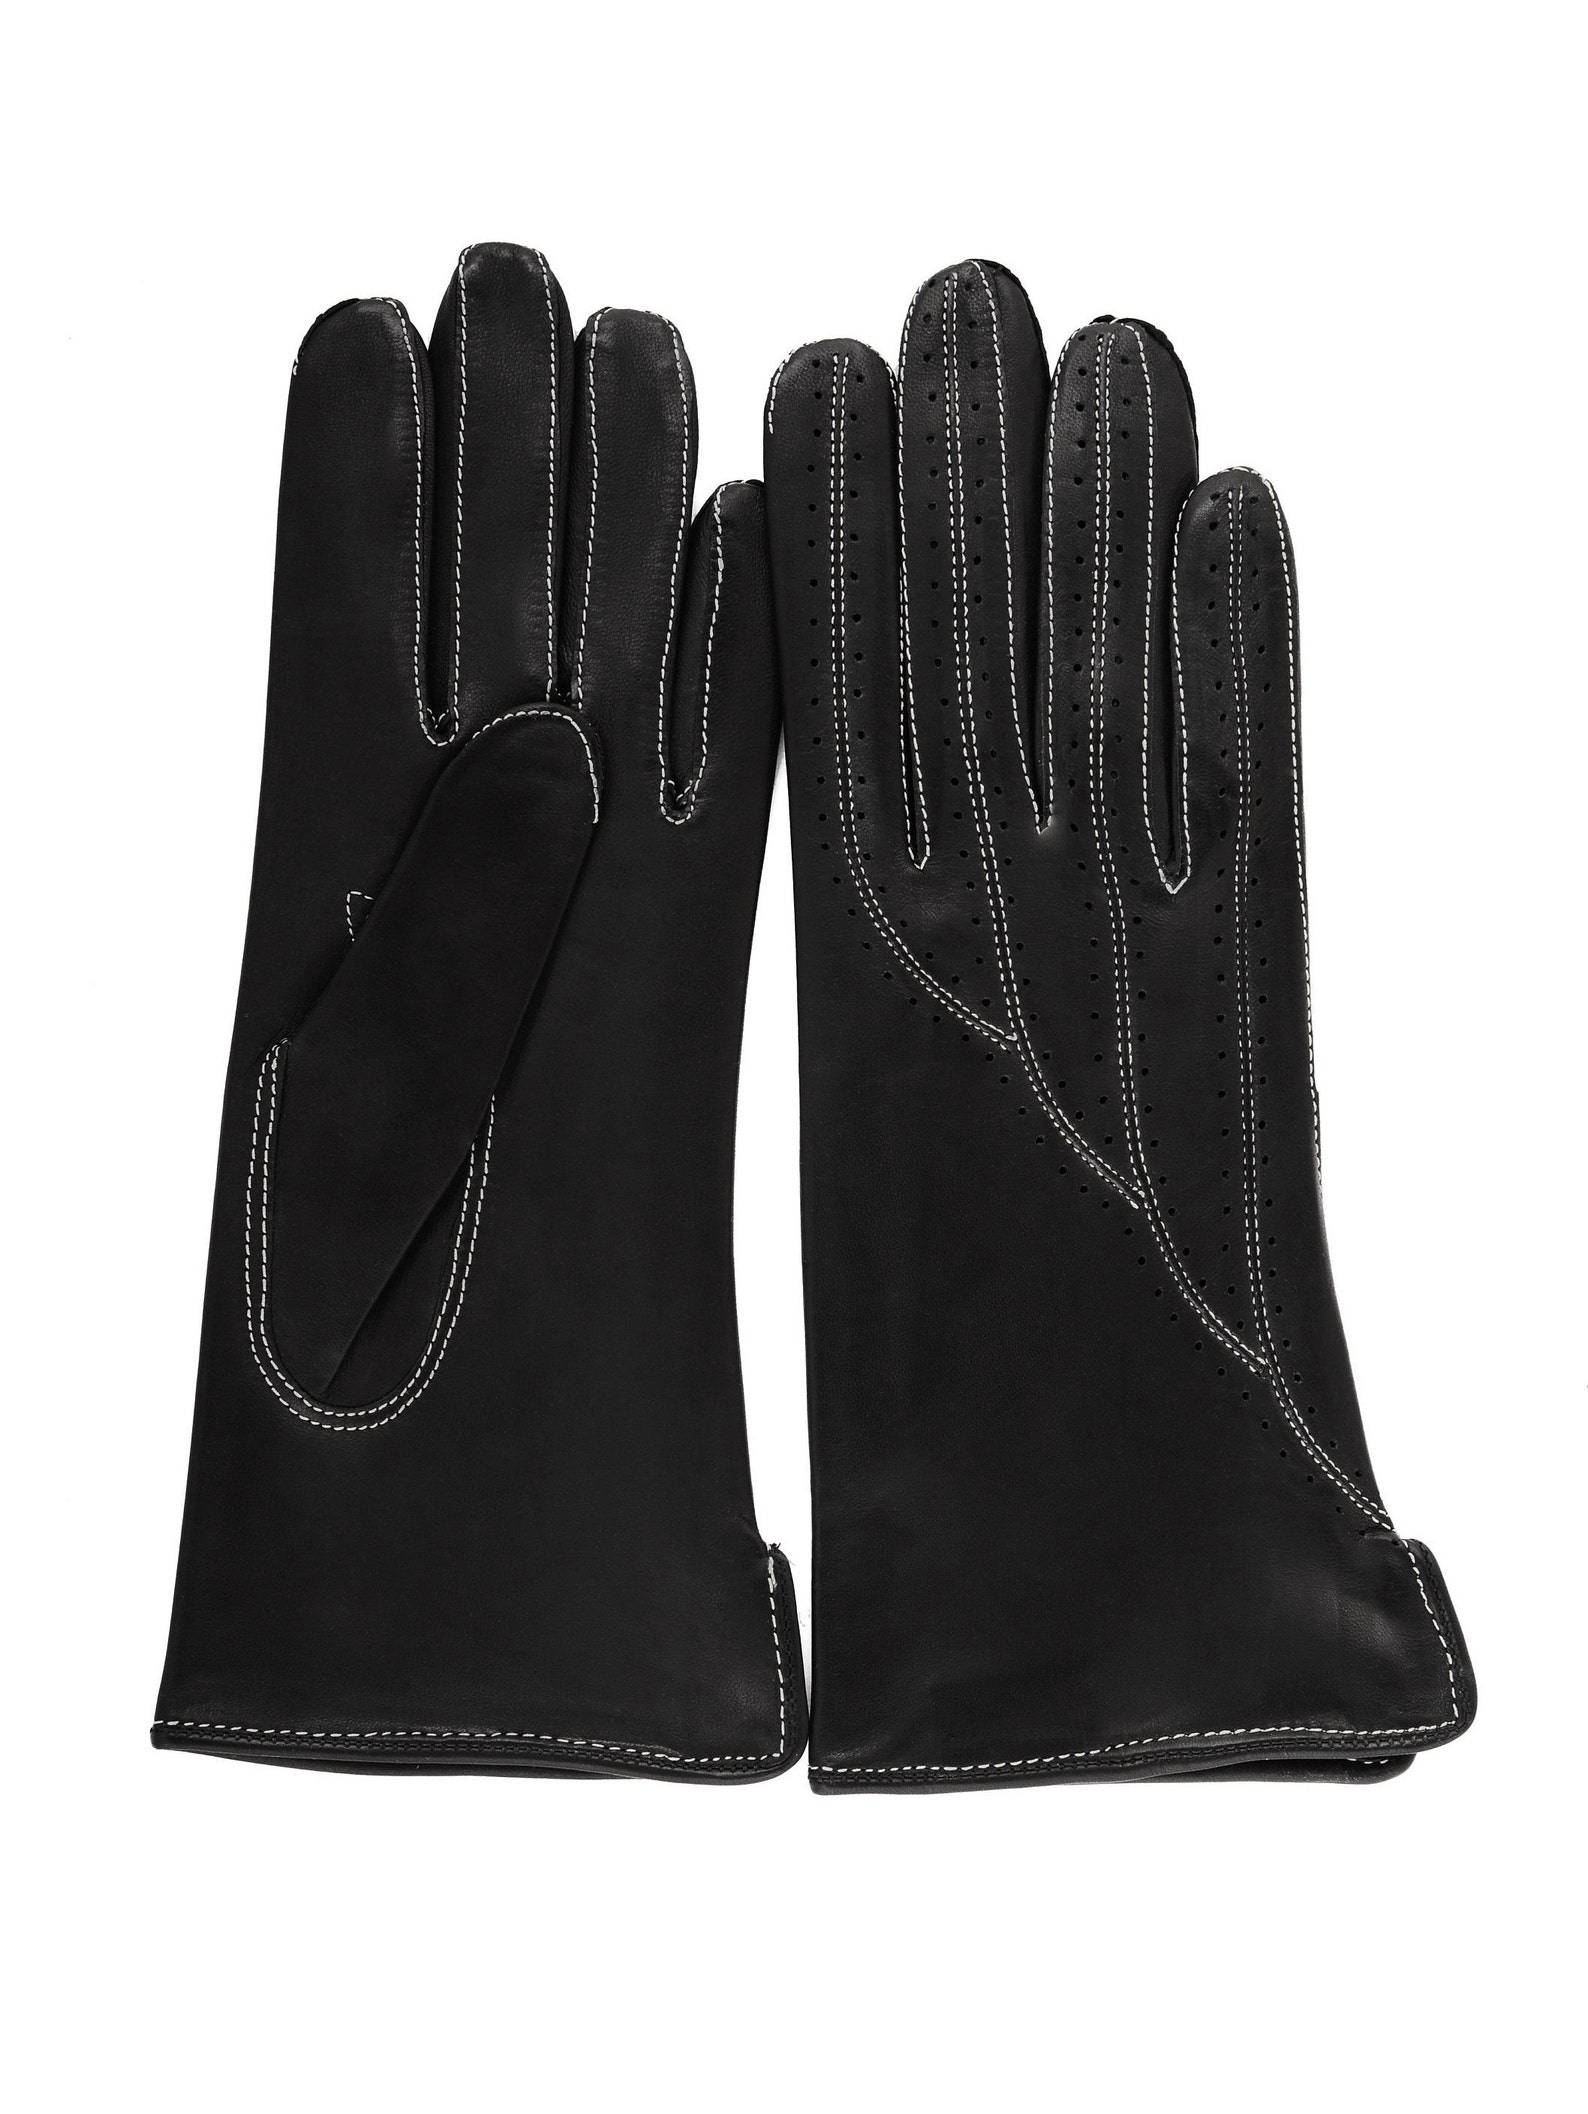 Gloves Are Female for Everyday Wearing/driving a Car/natural - Etsy